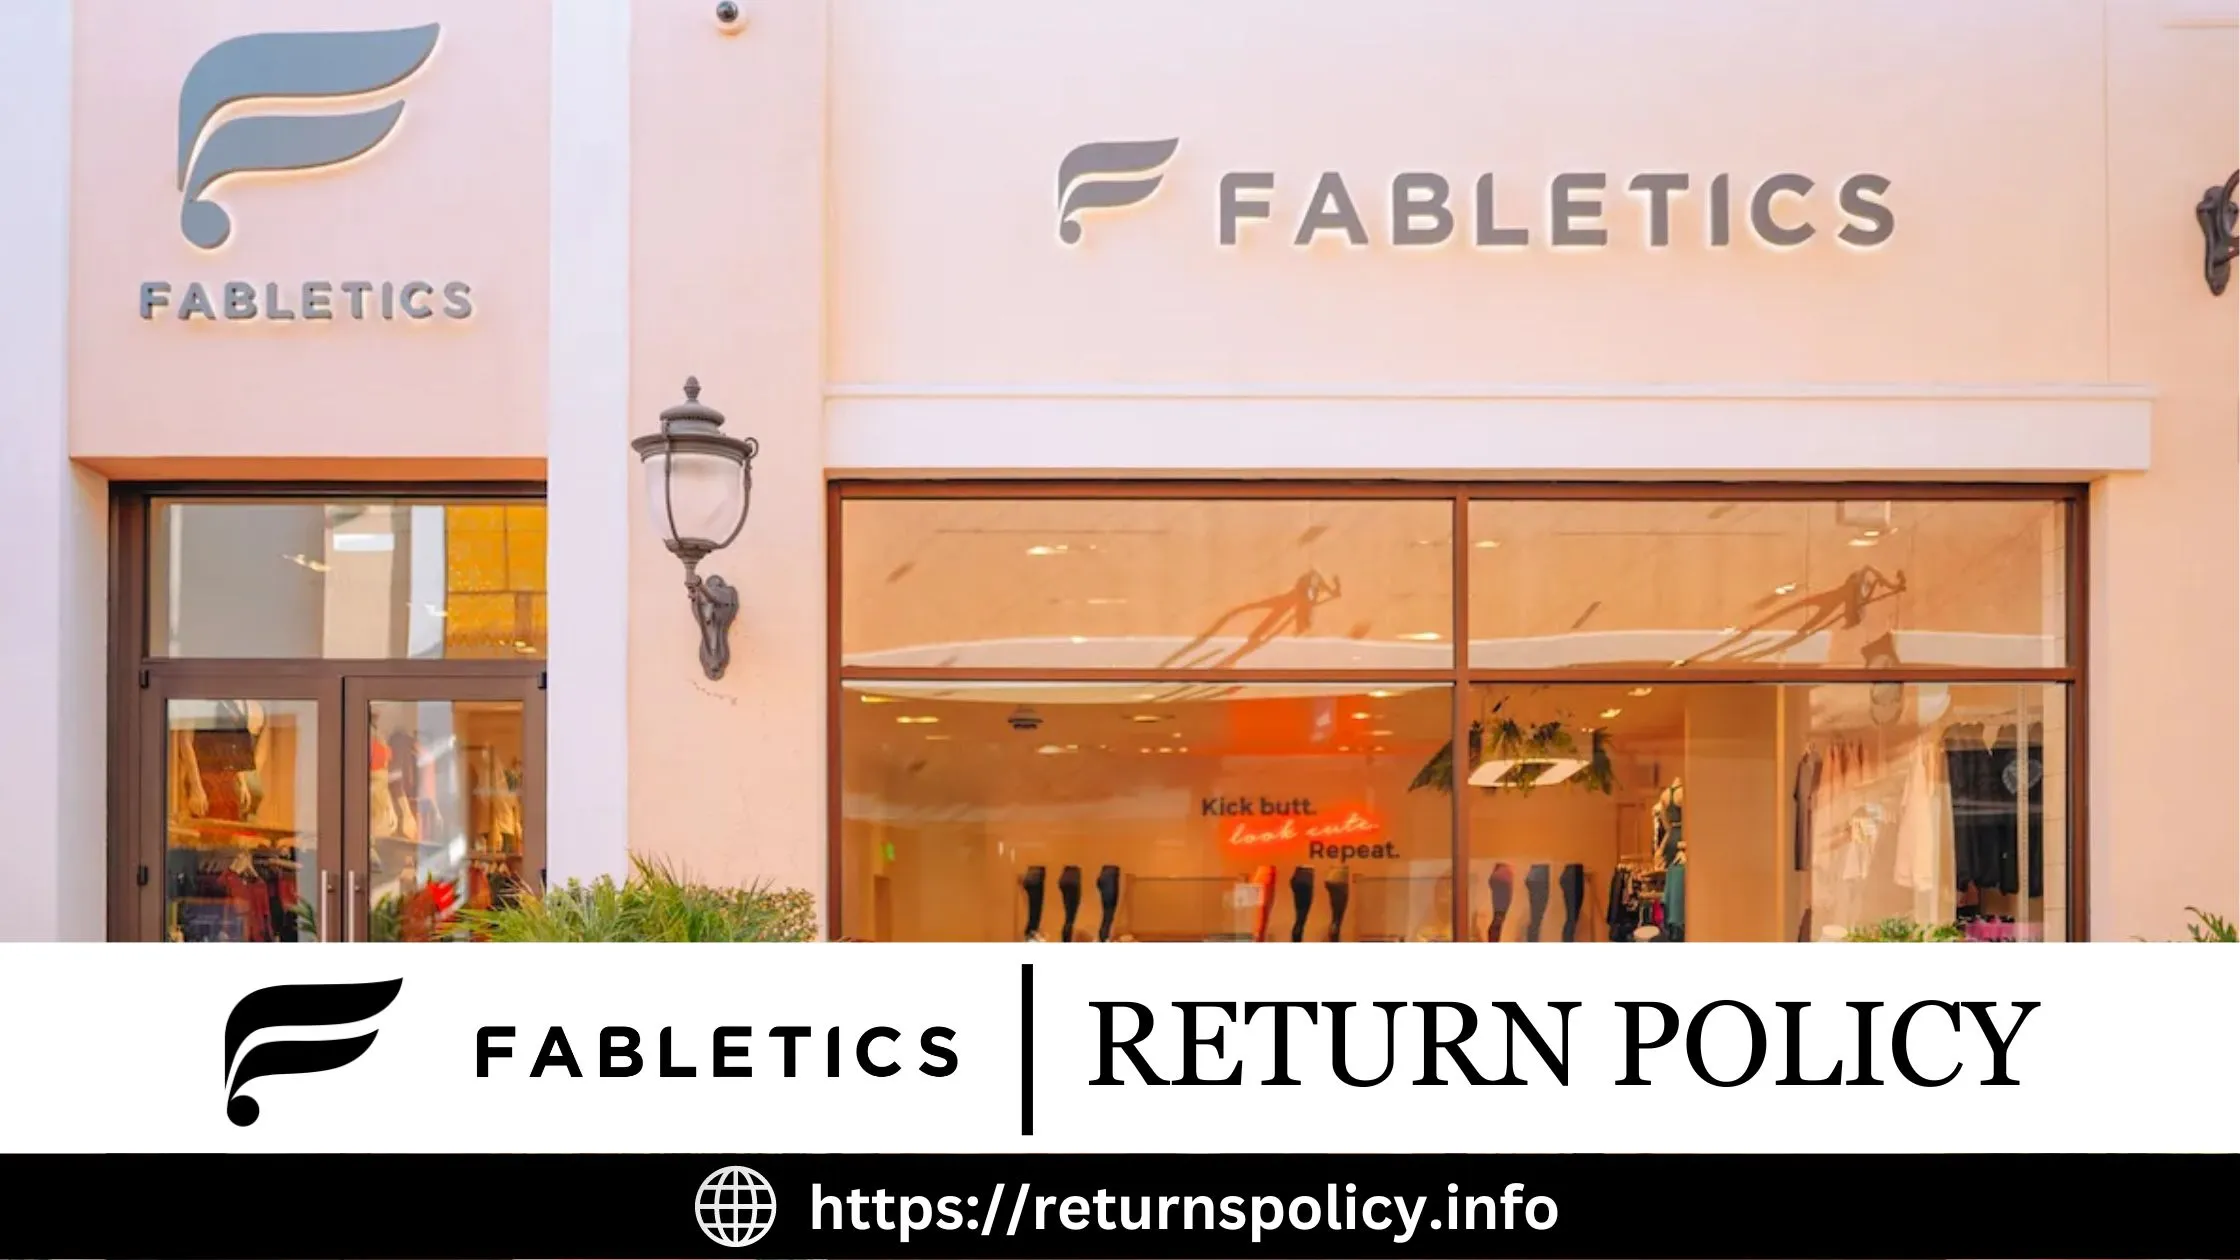 Fabletics Return Policy